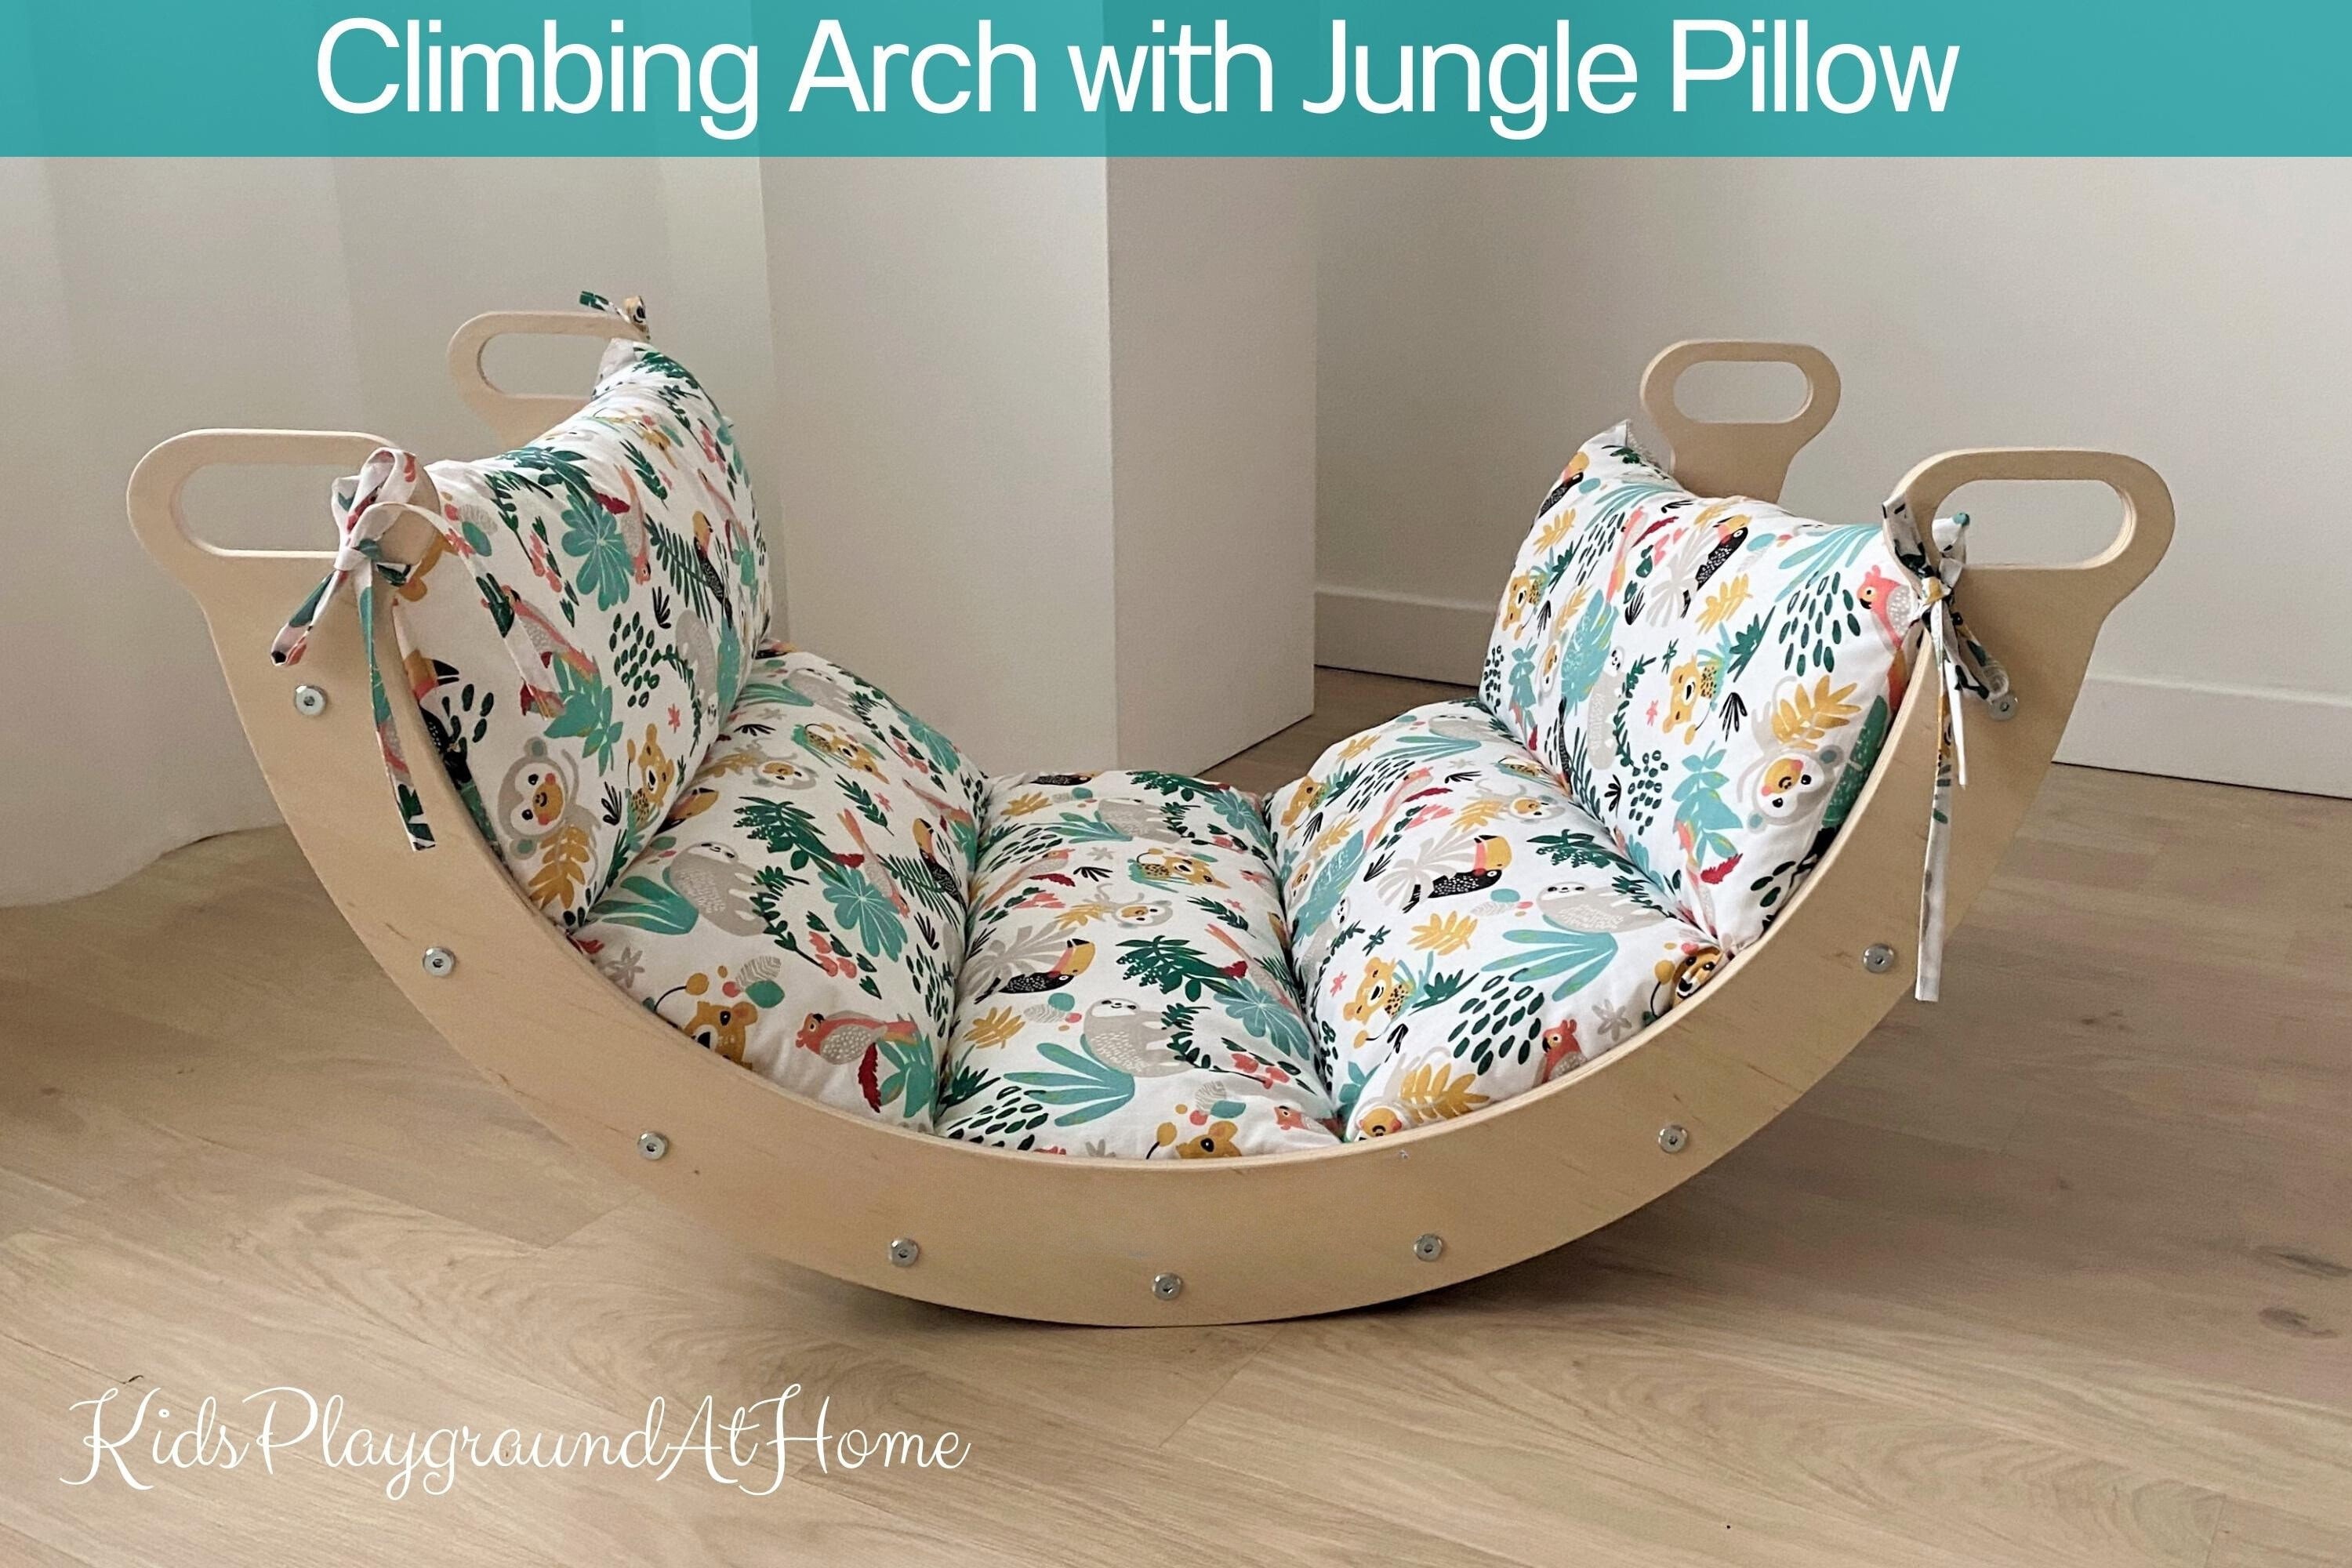 Pillow for Climbing Arch, Play Cushion for Climbing Bow, Cushion for  Rocker, Cushion for Climbing Arch, Rocker Cushion, Climbing Arch Pillow 